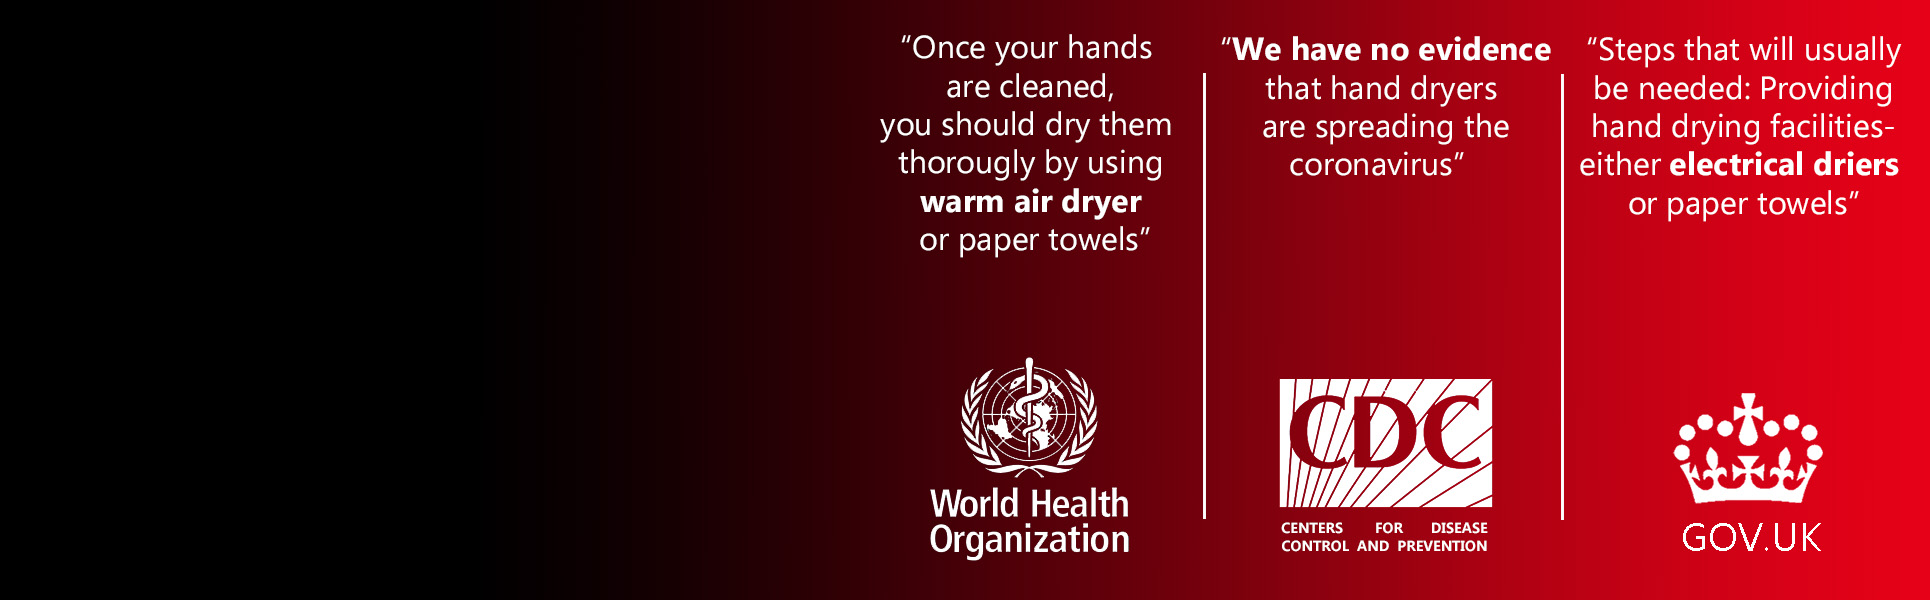 oms-cdc-recommendations-hand-washing